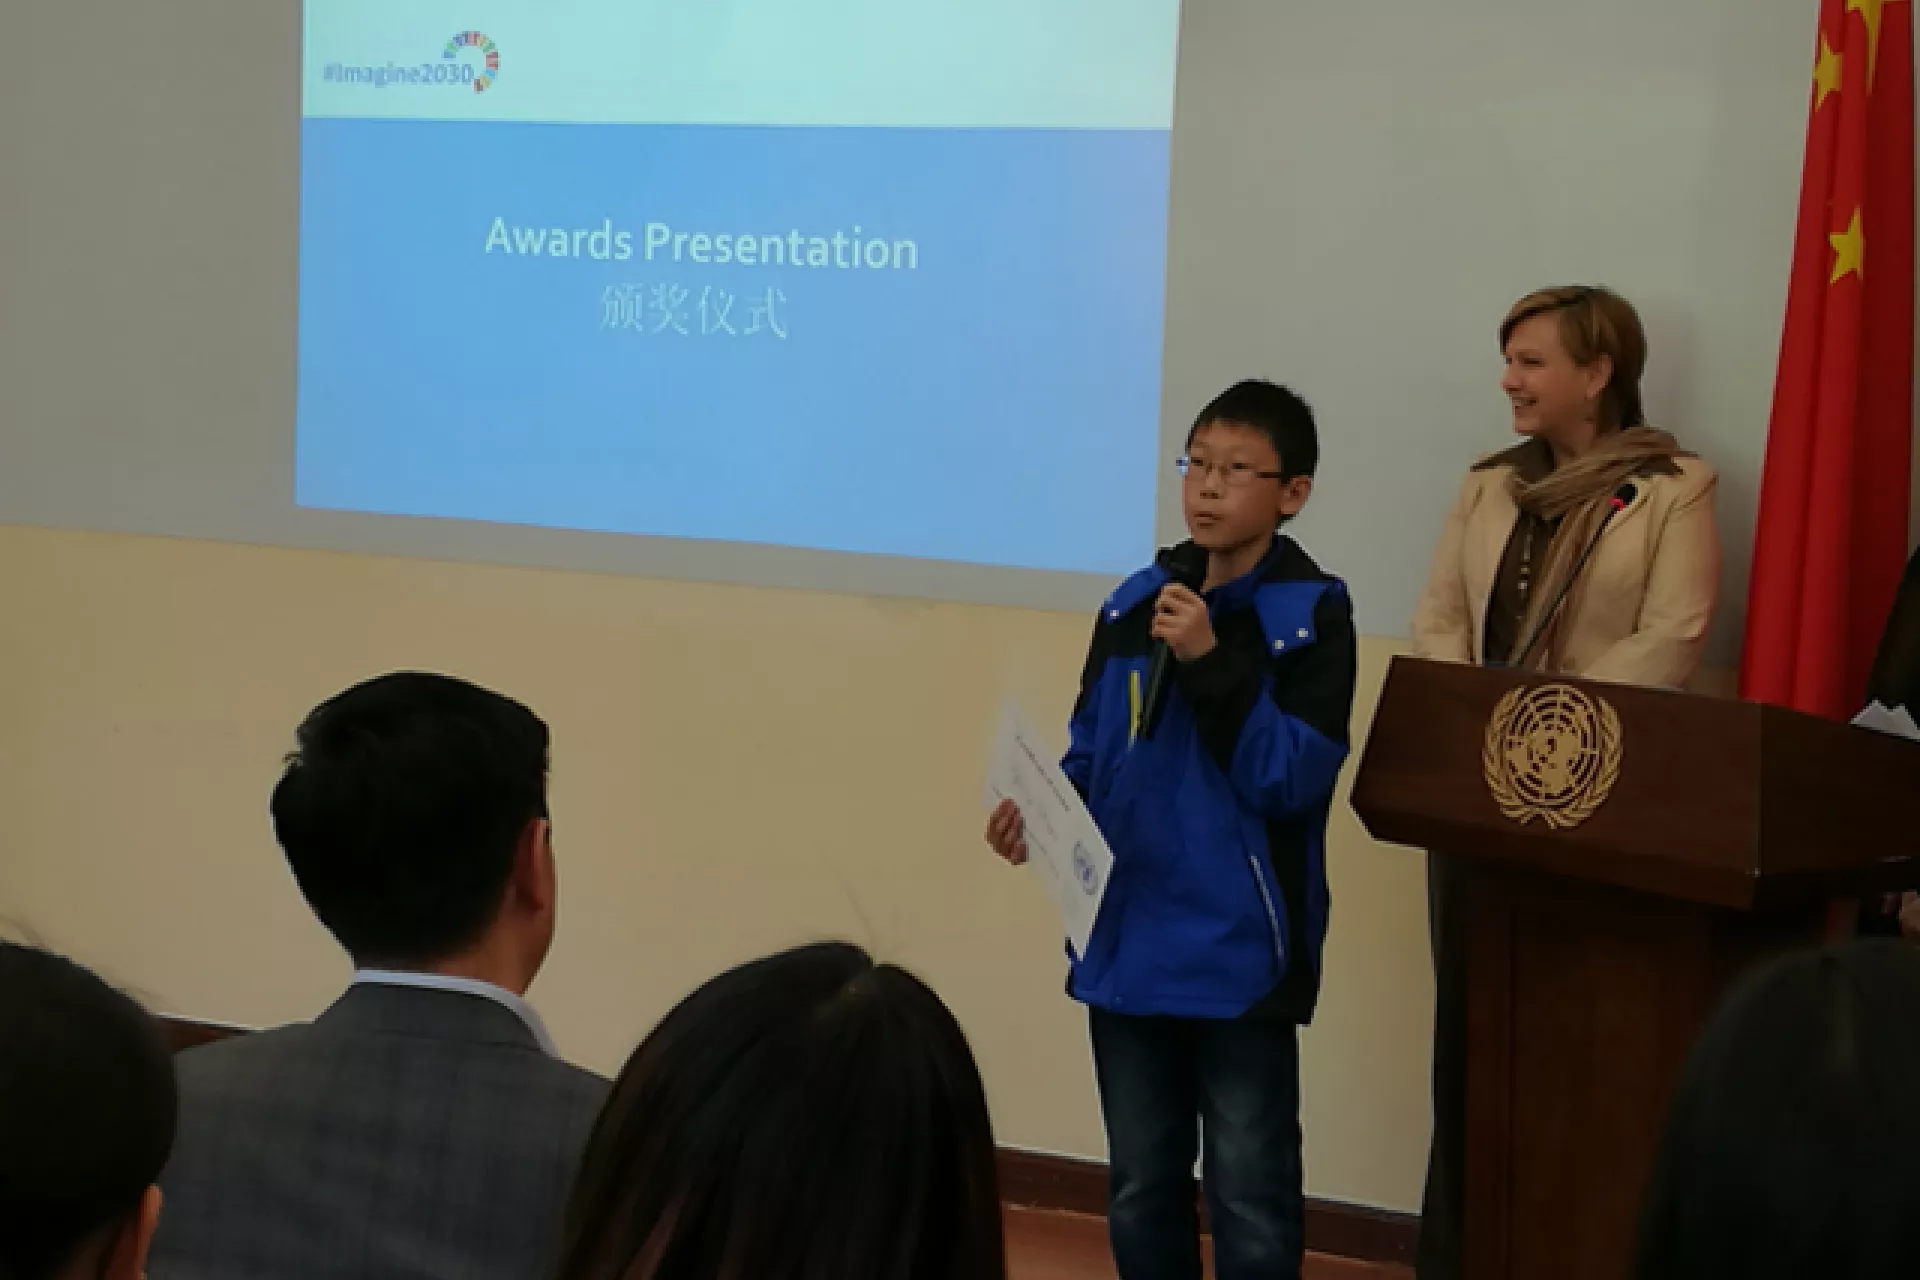 Zhang Qingze, aged 12 from Shandong Province, talks about his award winning art piece on SDG Goal 1.